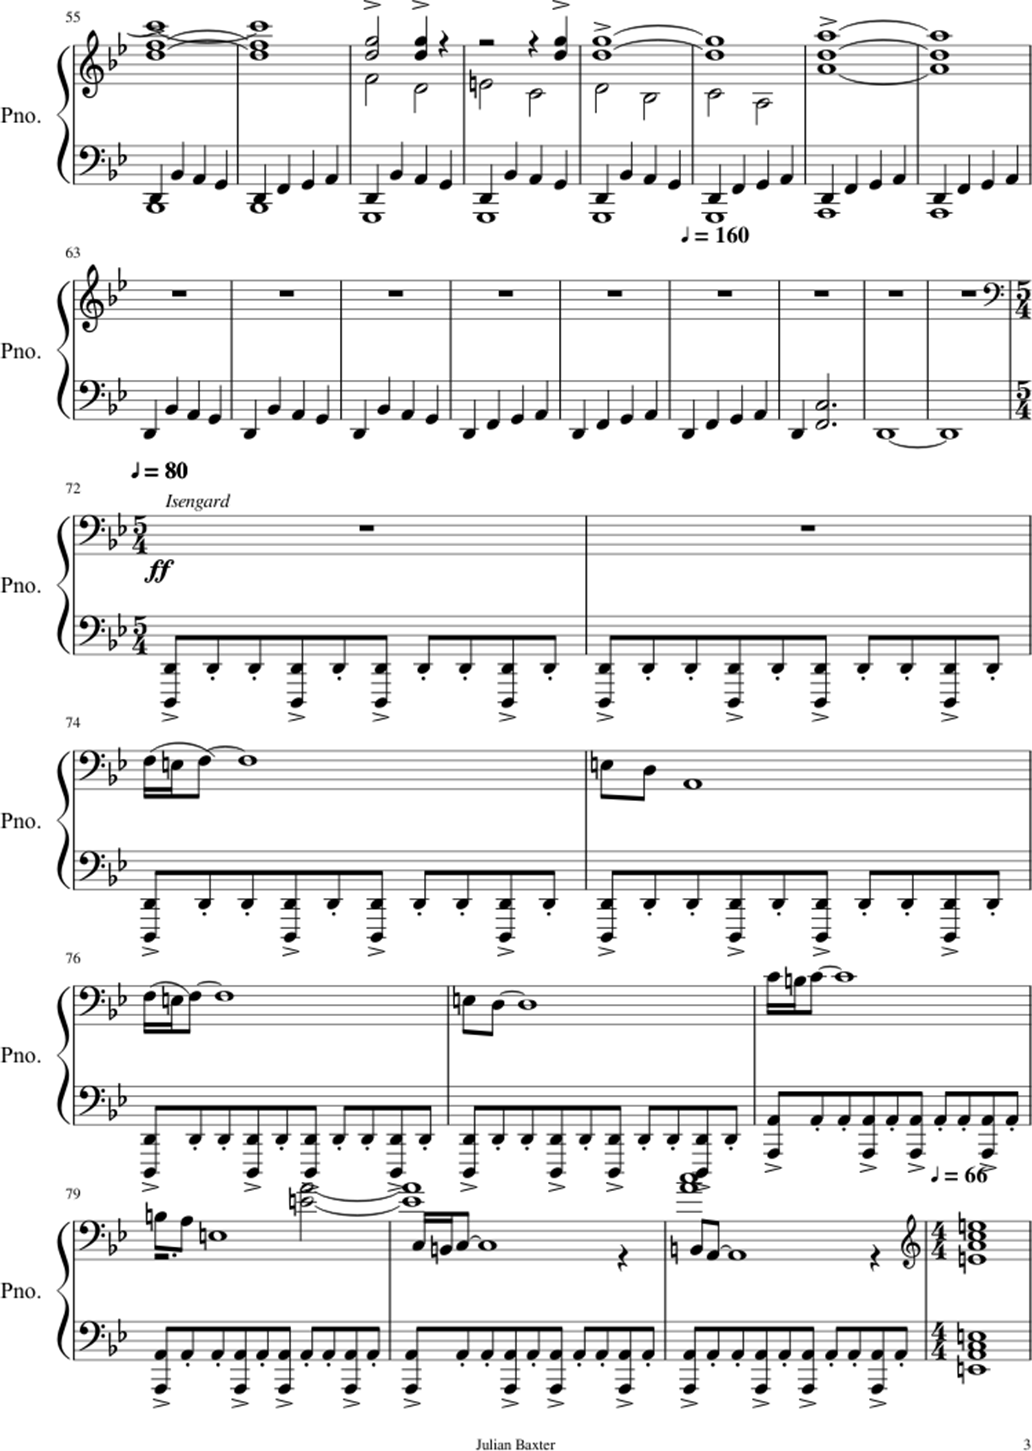 A knife in the dark sheet music notes 3